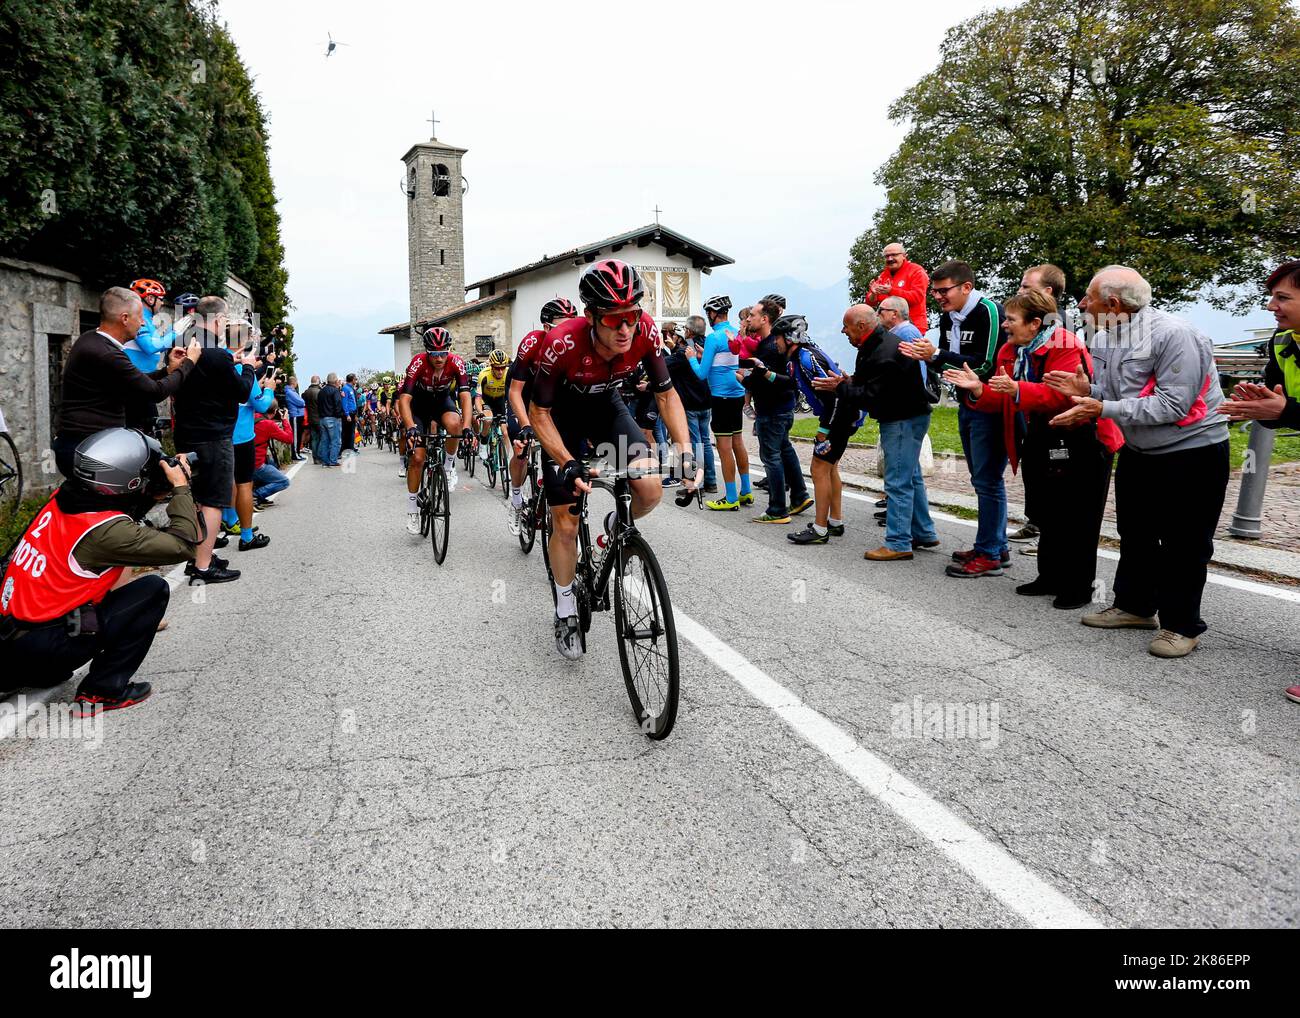 Team Ineos during the Il Lombardia 2019 race in Lombardia, Italy on Saturday October 12, 2019. Stock Photo